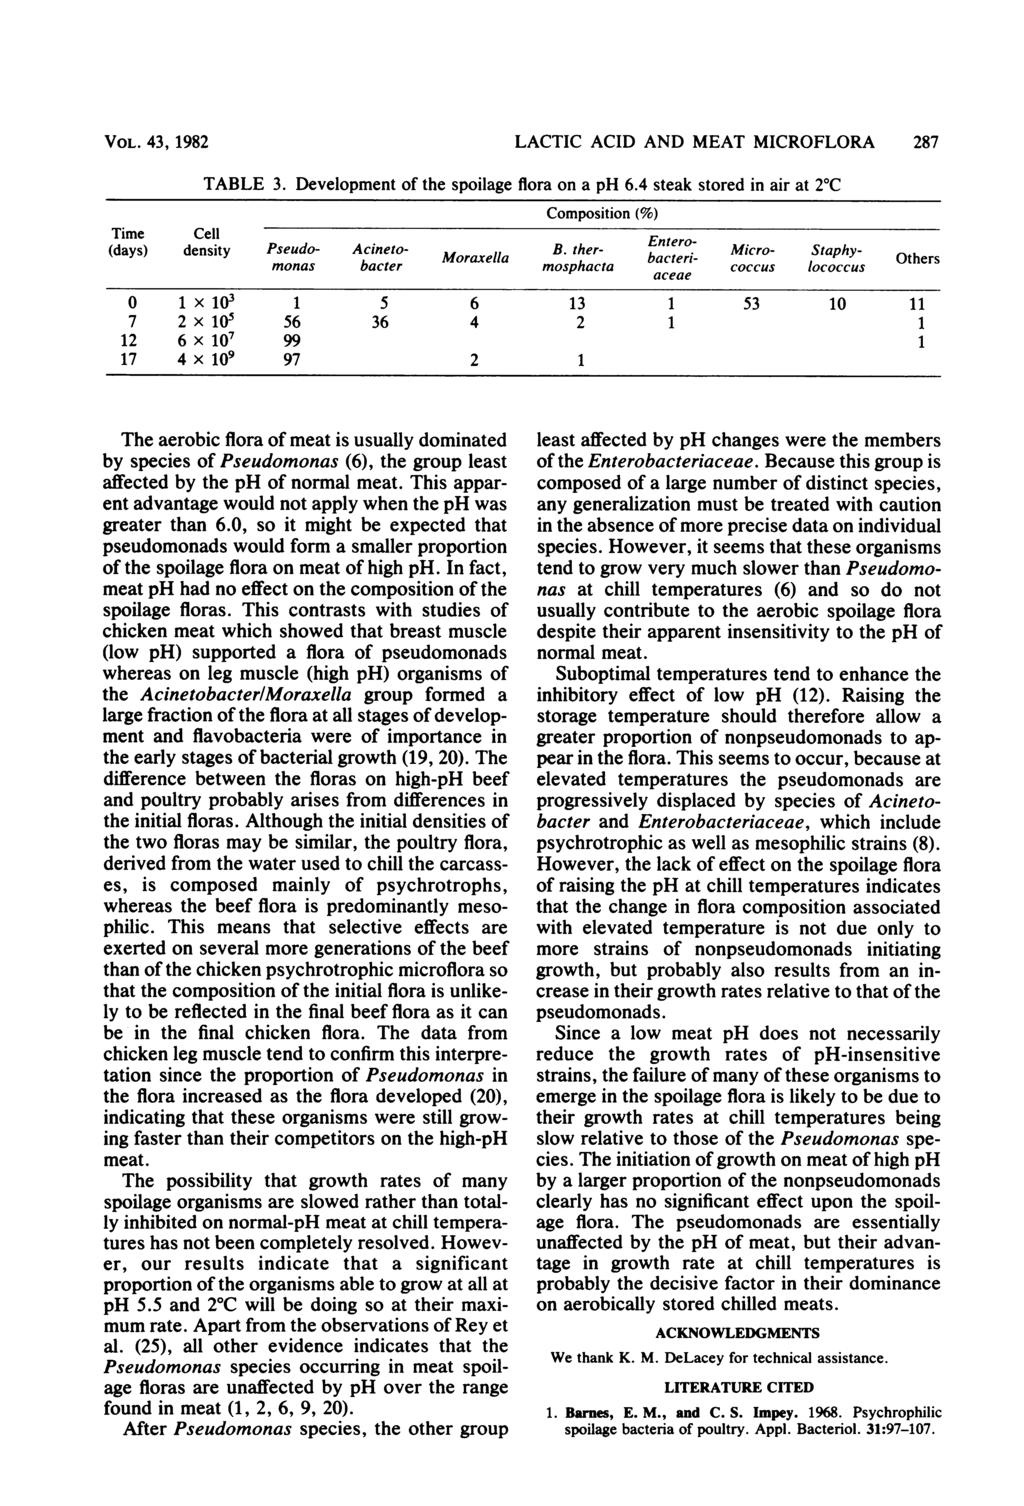 VOL. 43, 1982 LACTIC ACID AND MEAT MICROFLORA 287 TABLE 3. Development of the spoilage flora on a ph 6.